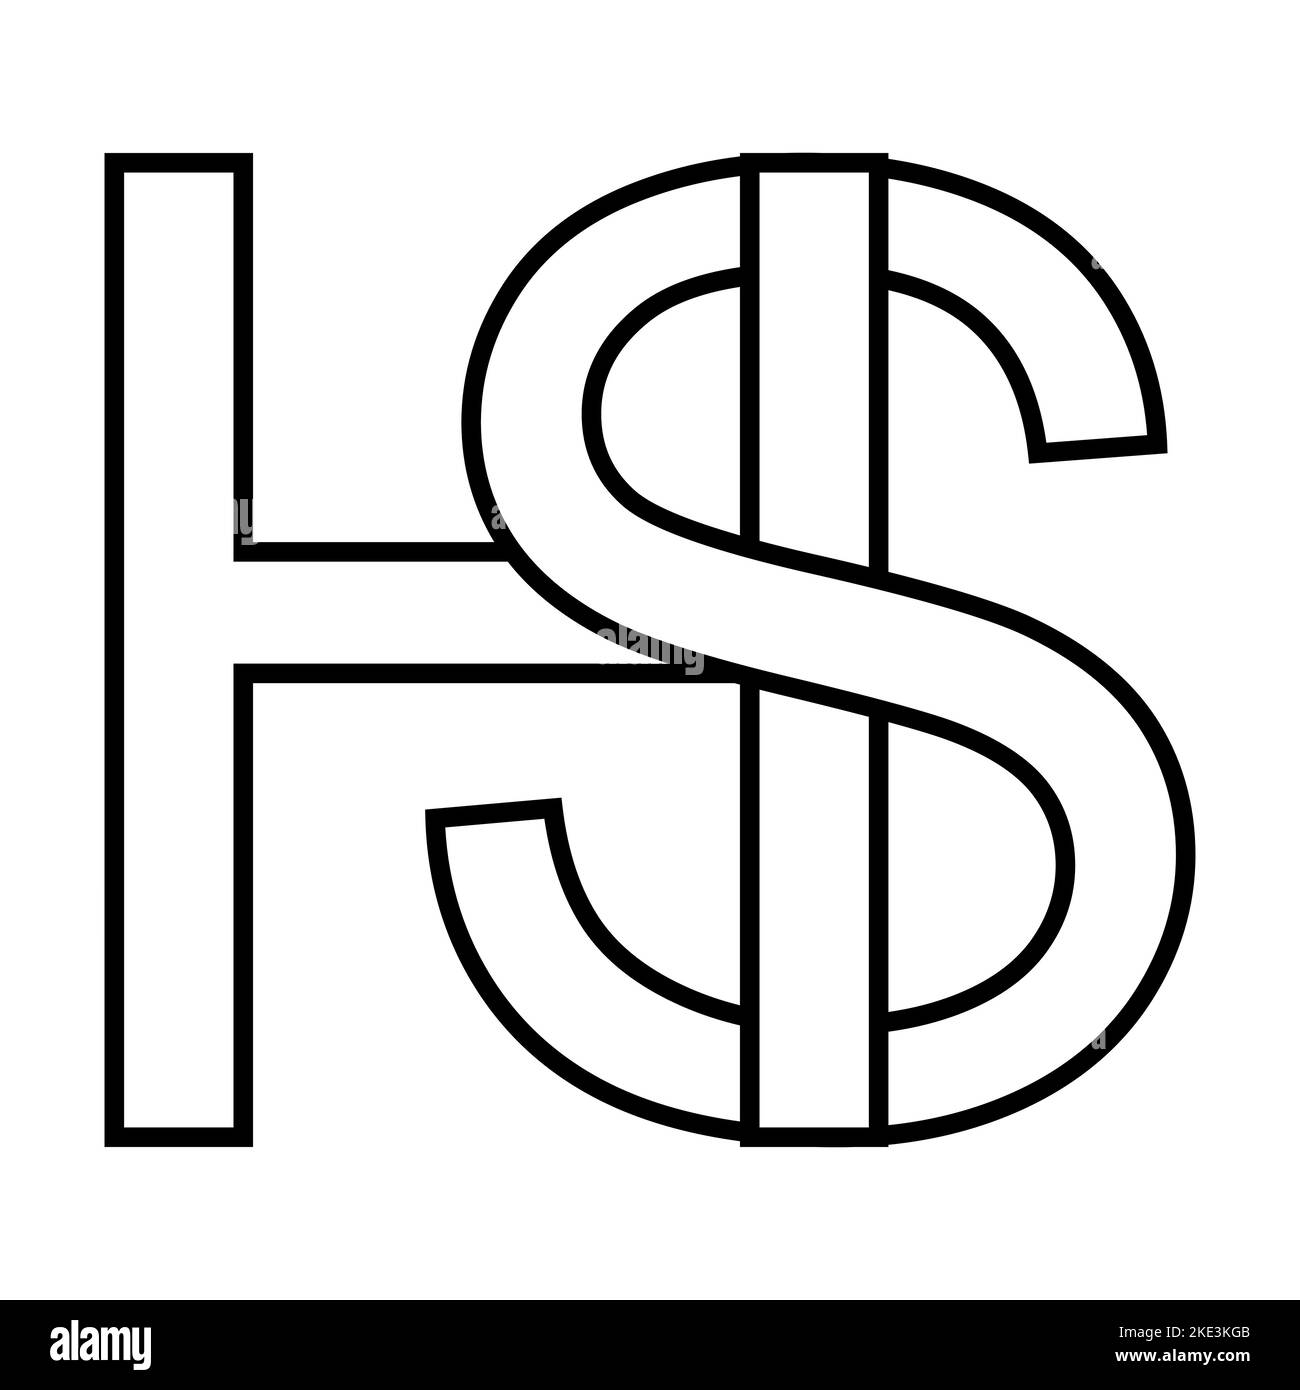 Logo sign hs sh icon nft interlaced letters s h Stock Vector